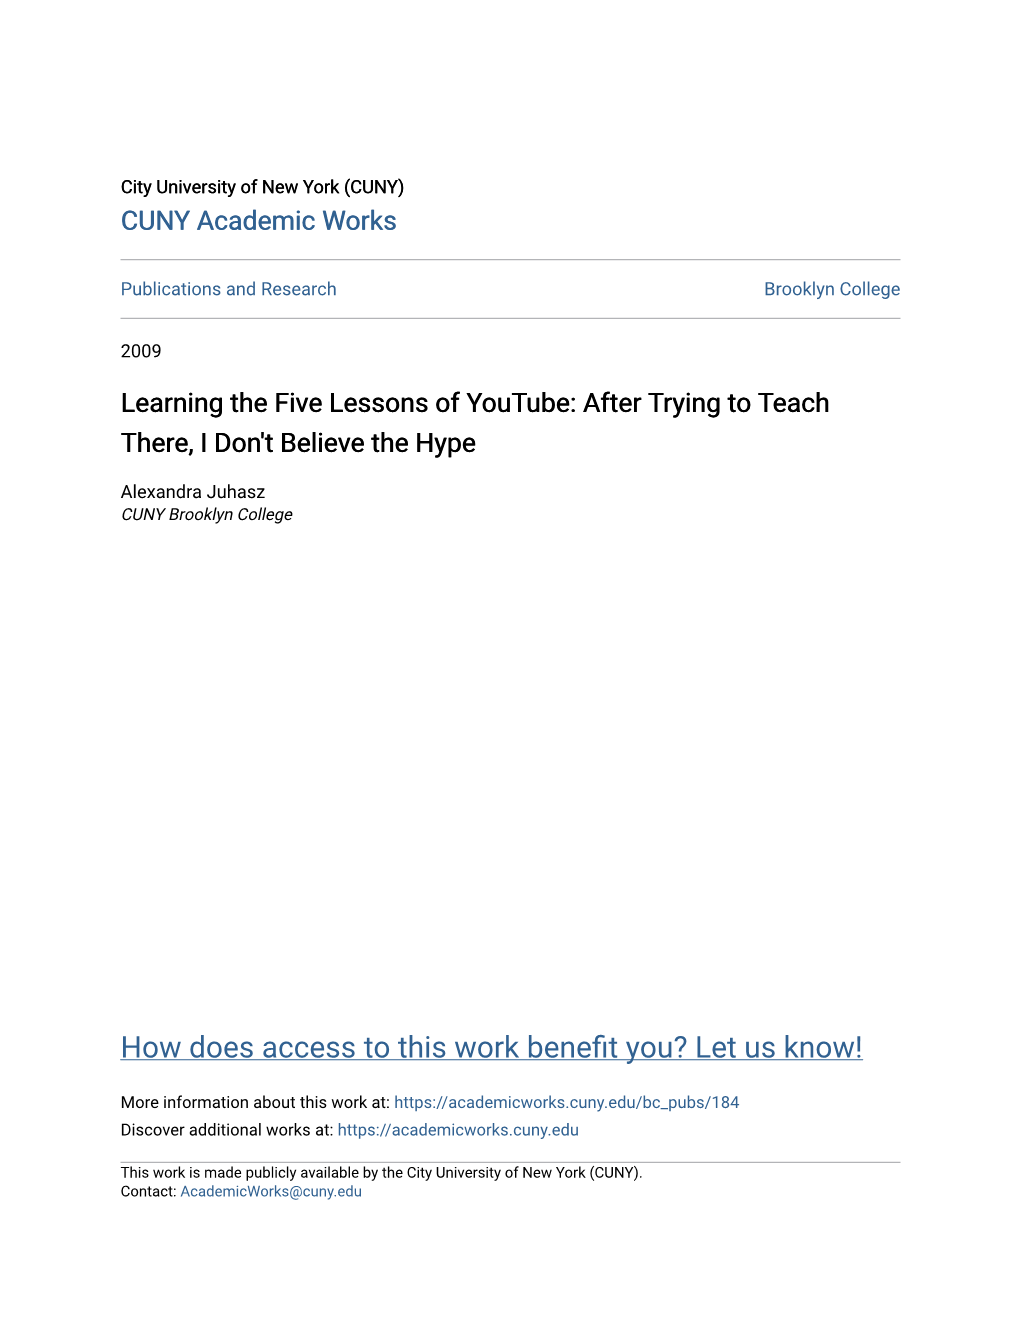 Learning the Five Lessons of Youtube: After Trying to Teach There, I Don't Believe the Hype